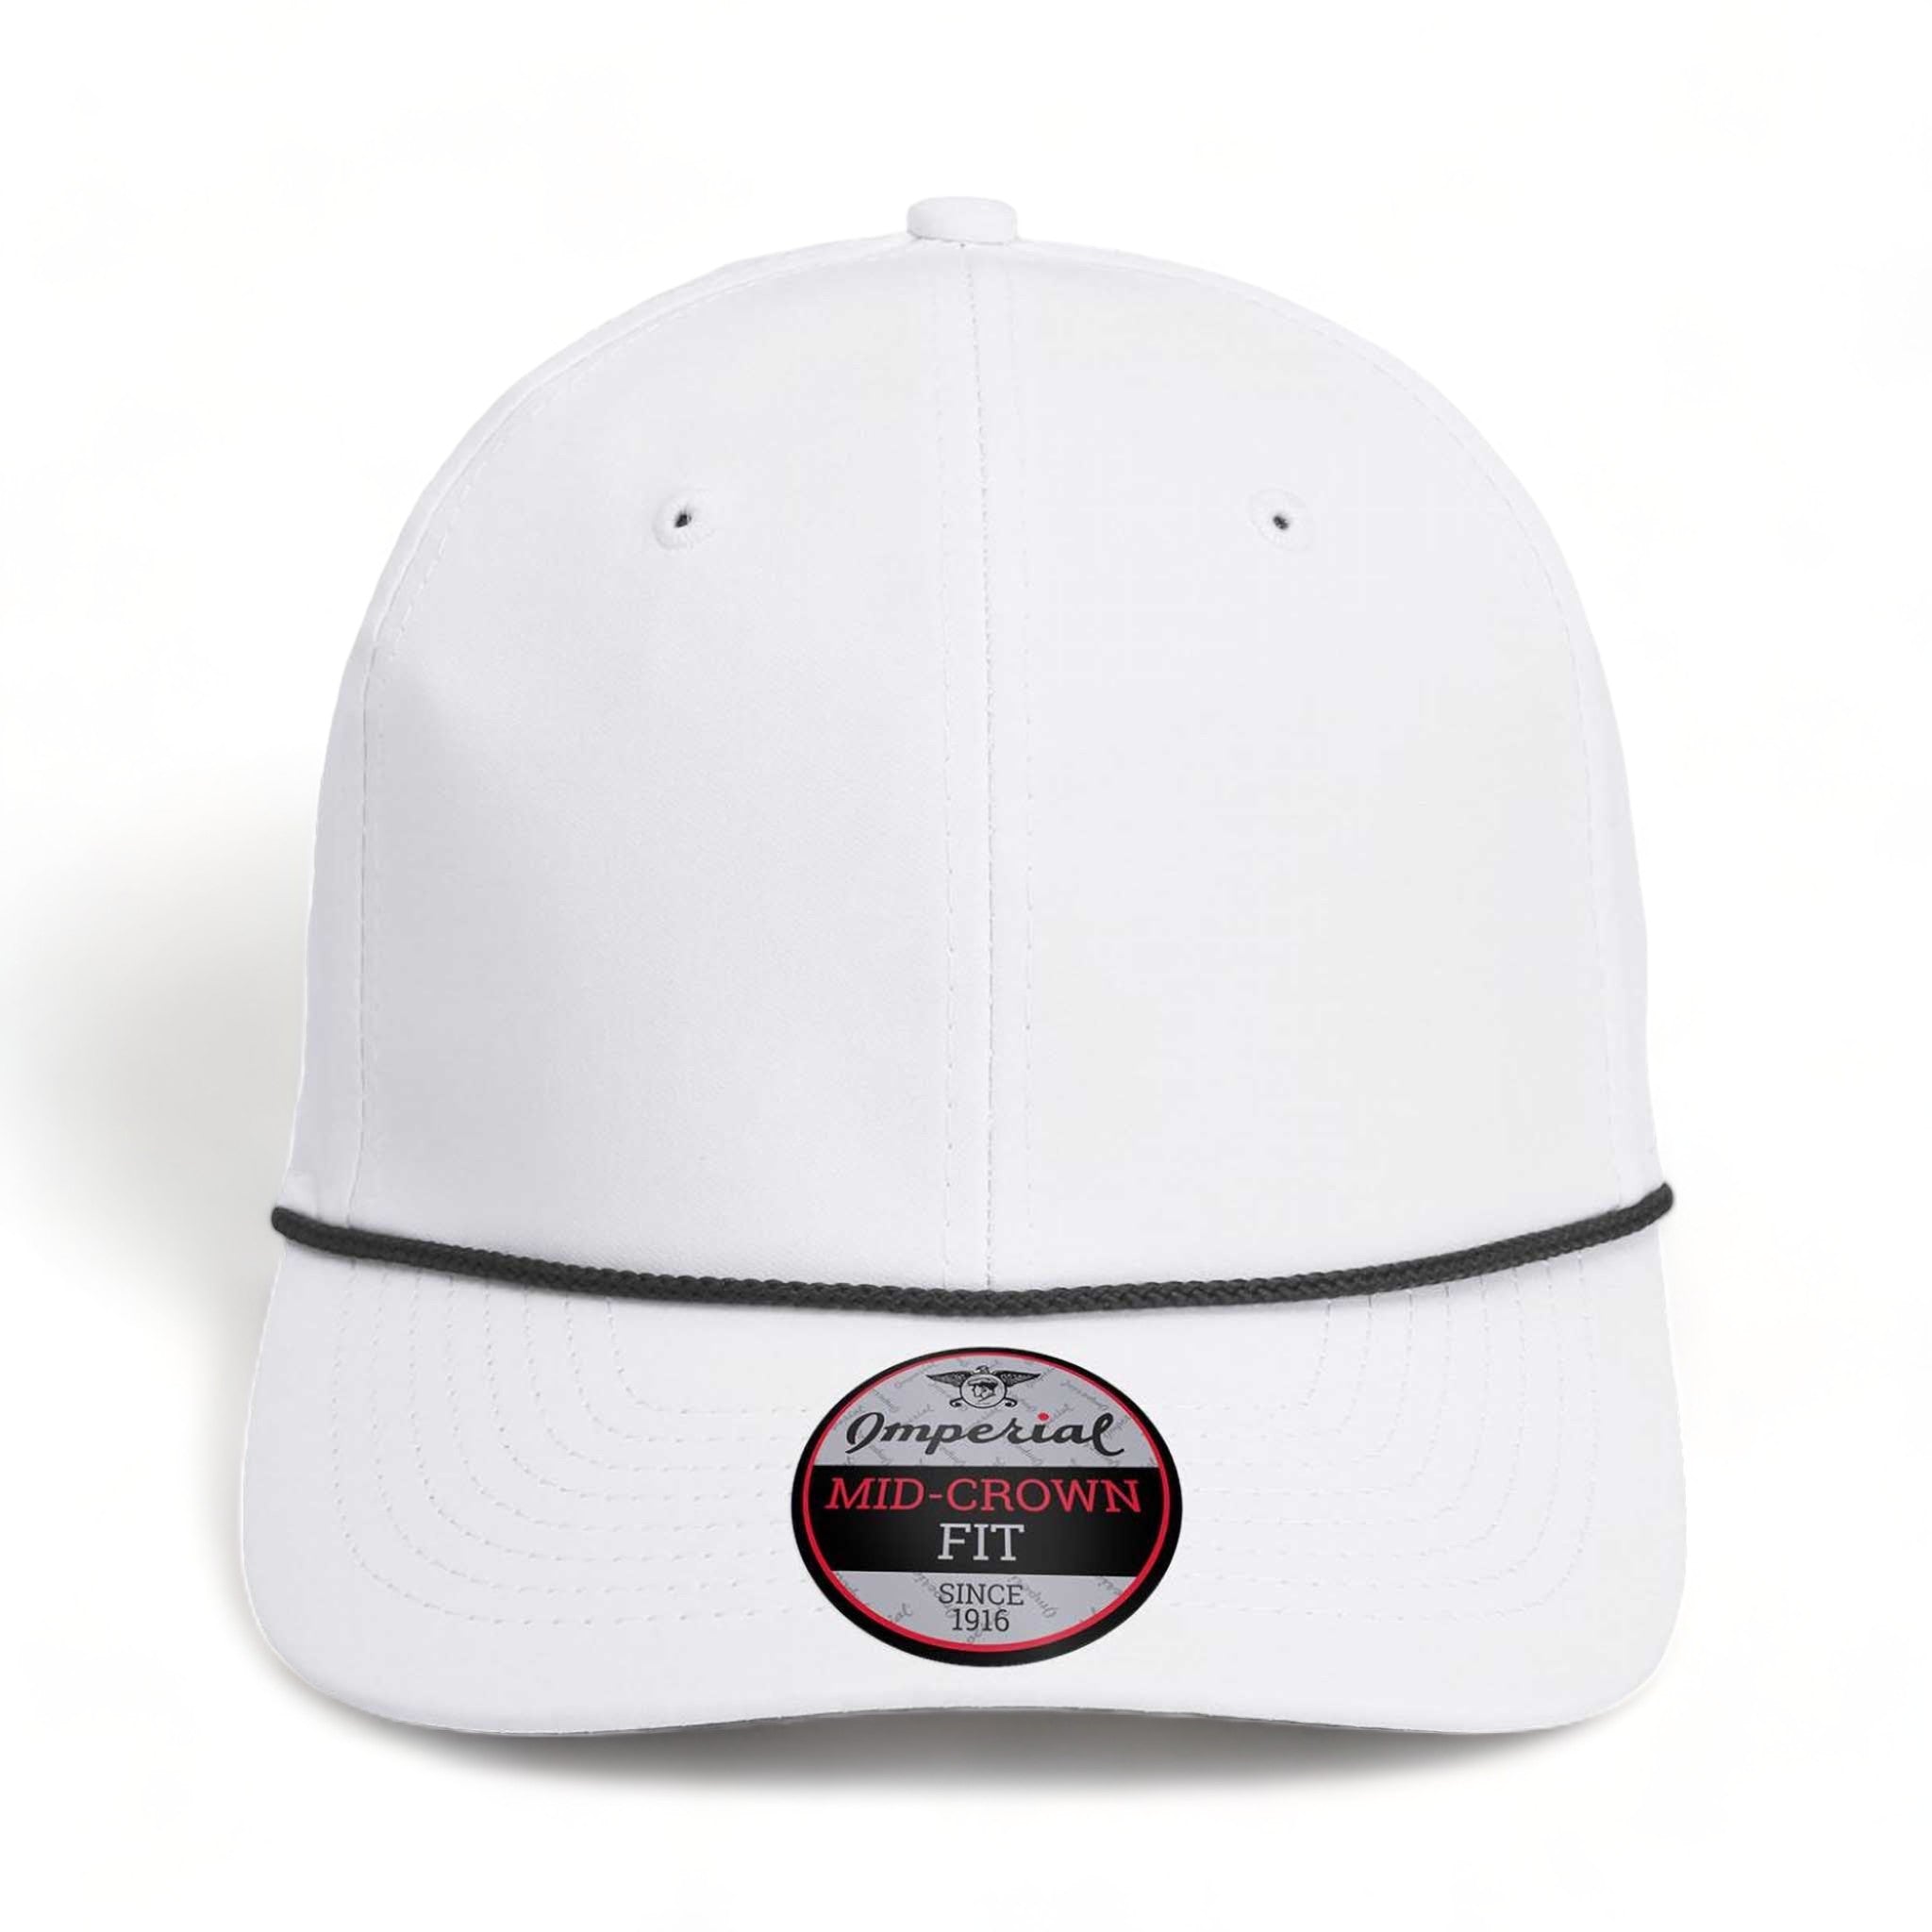 Front view of Imperial 7054 custom hat in white and black